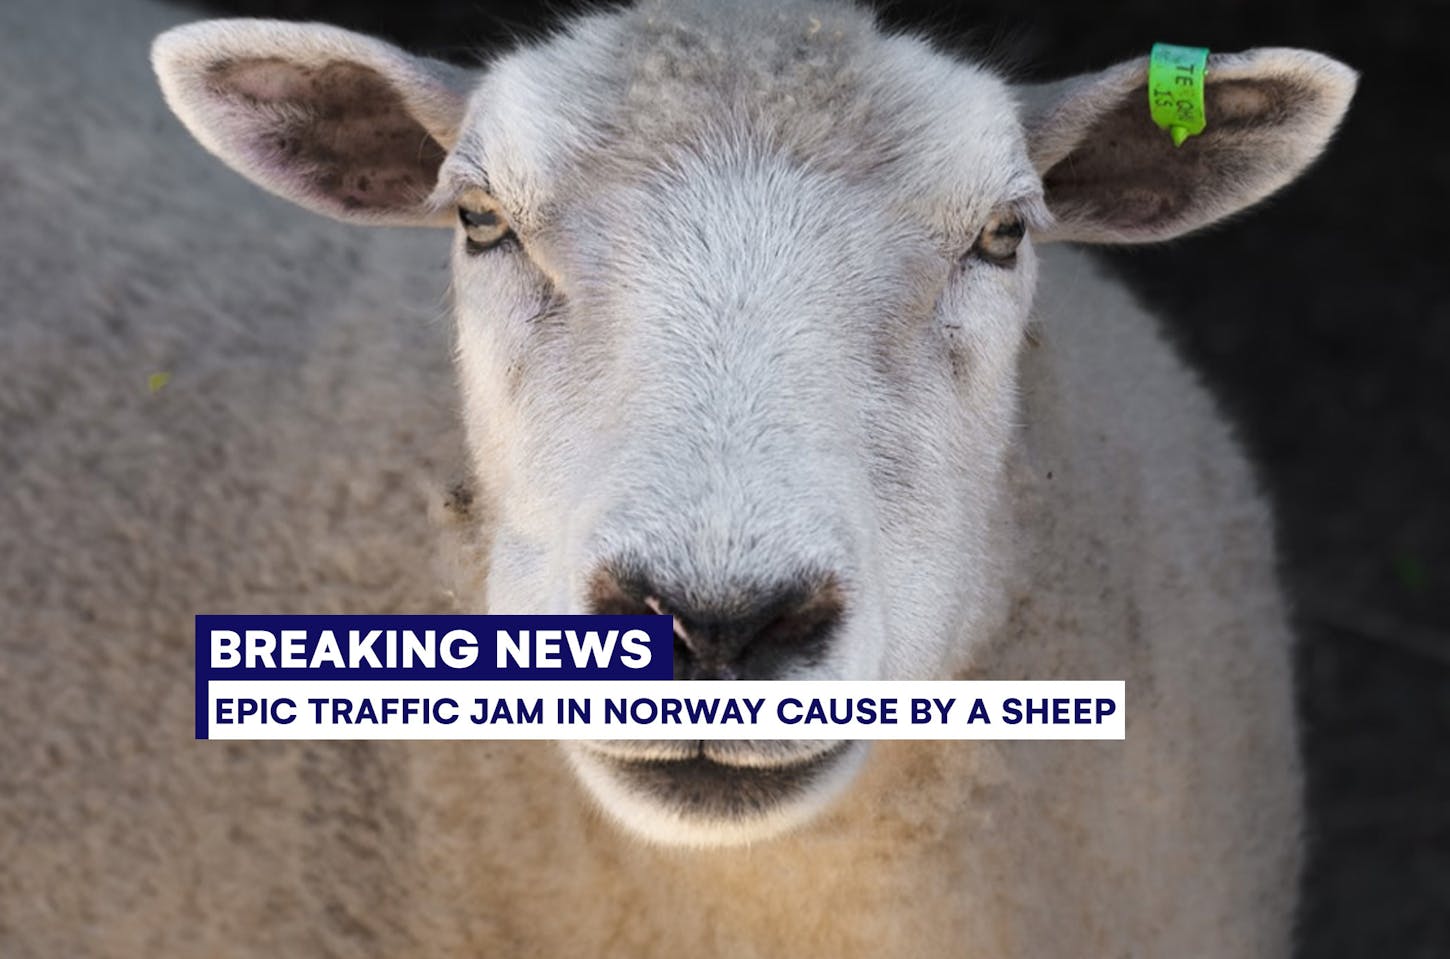 Funny news in Norway during the silly season | Mycall